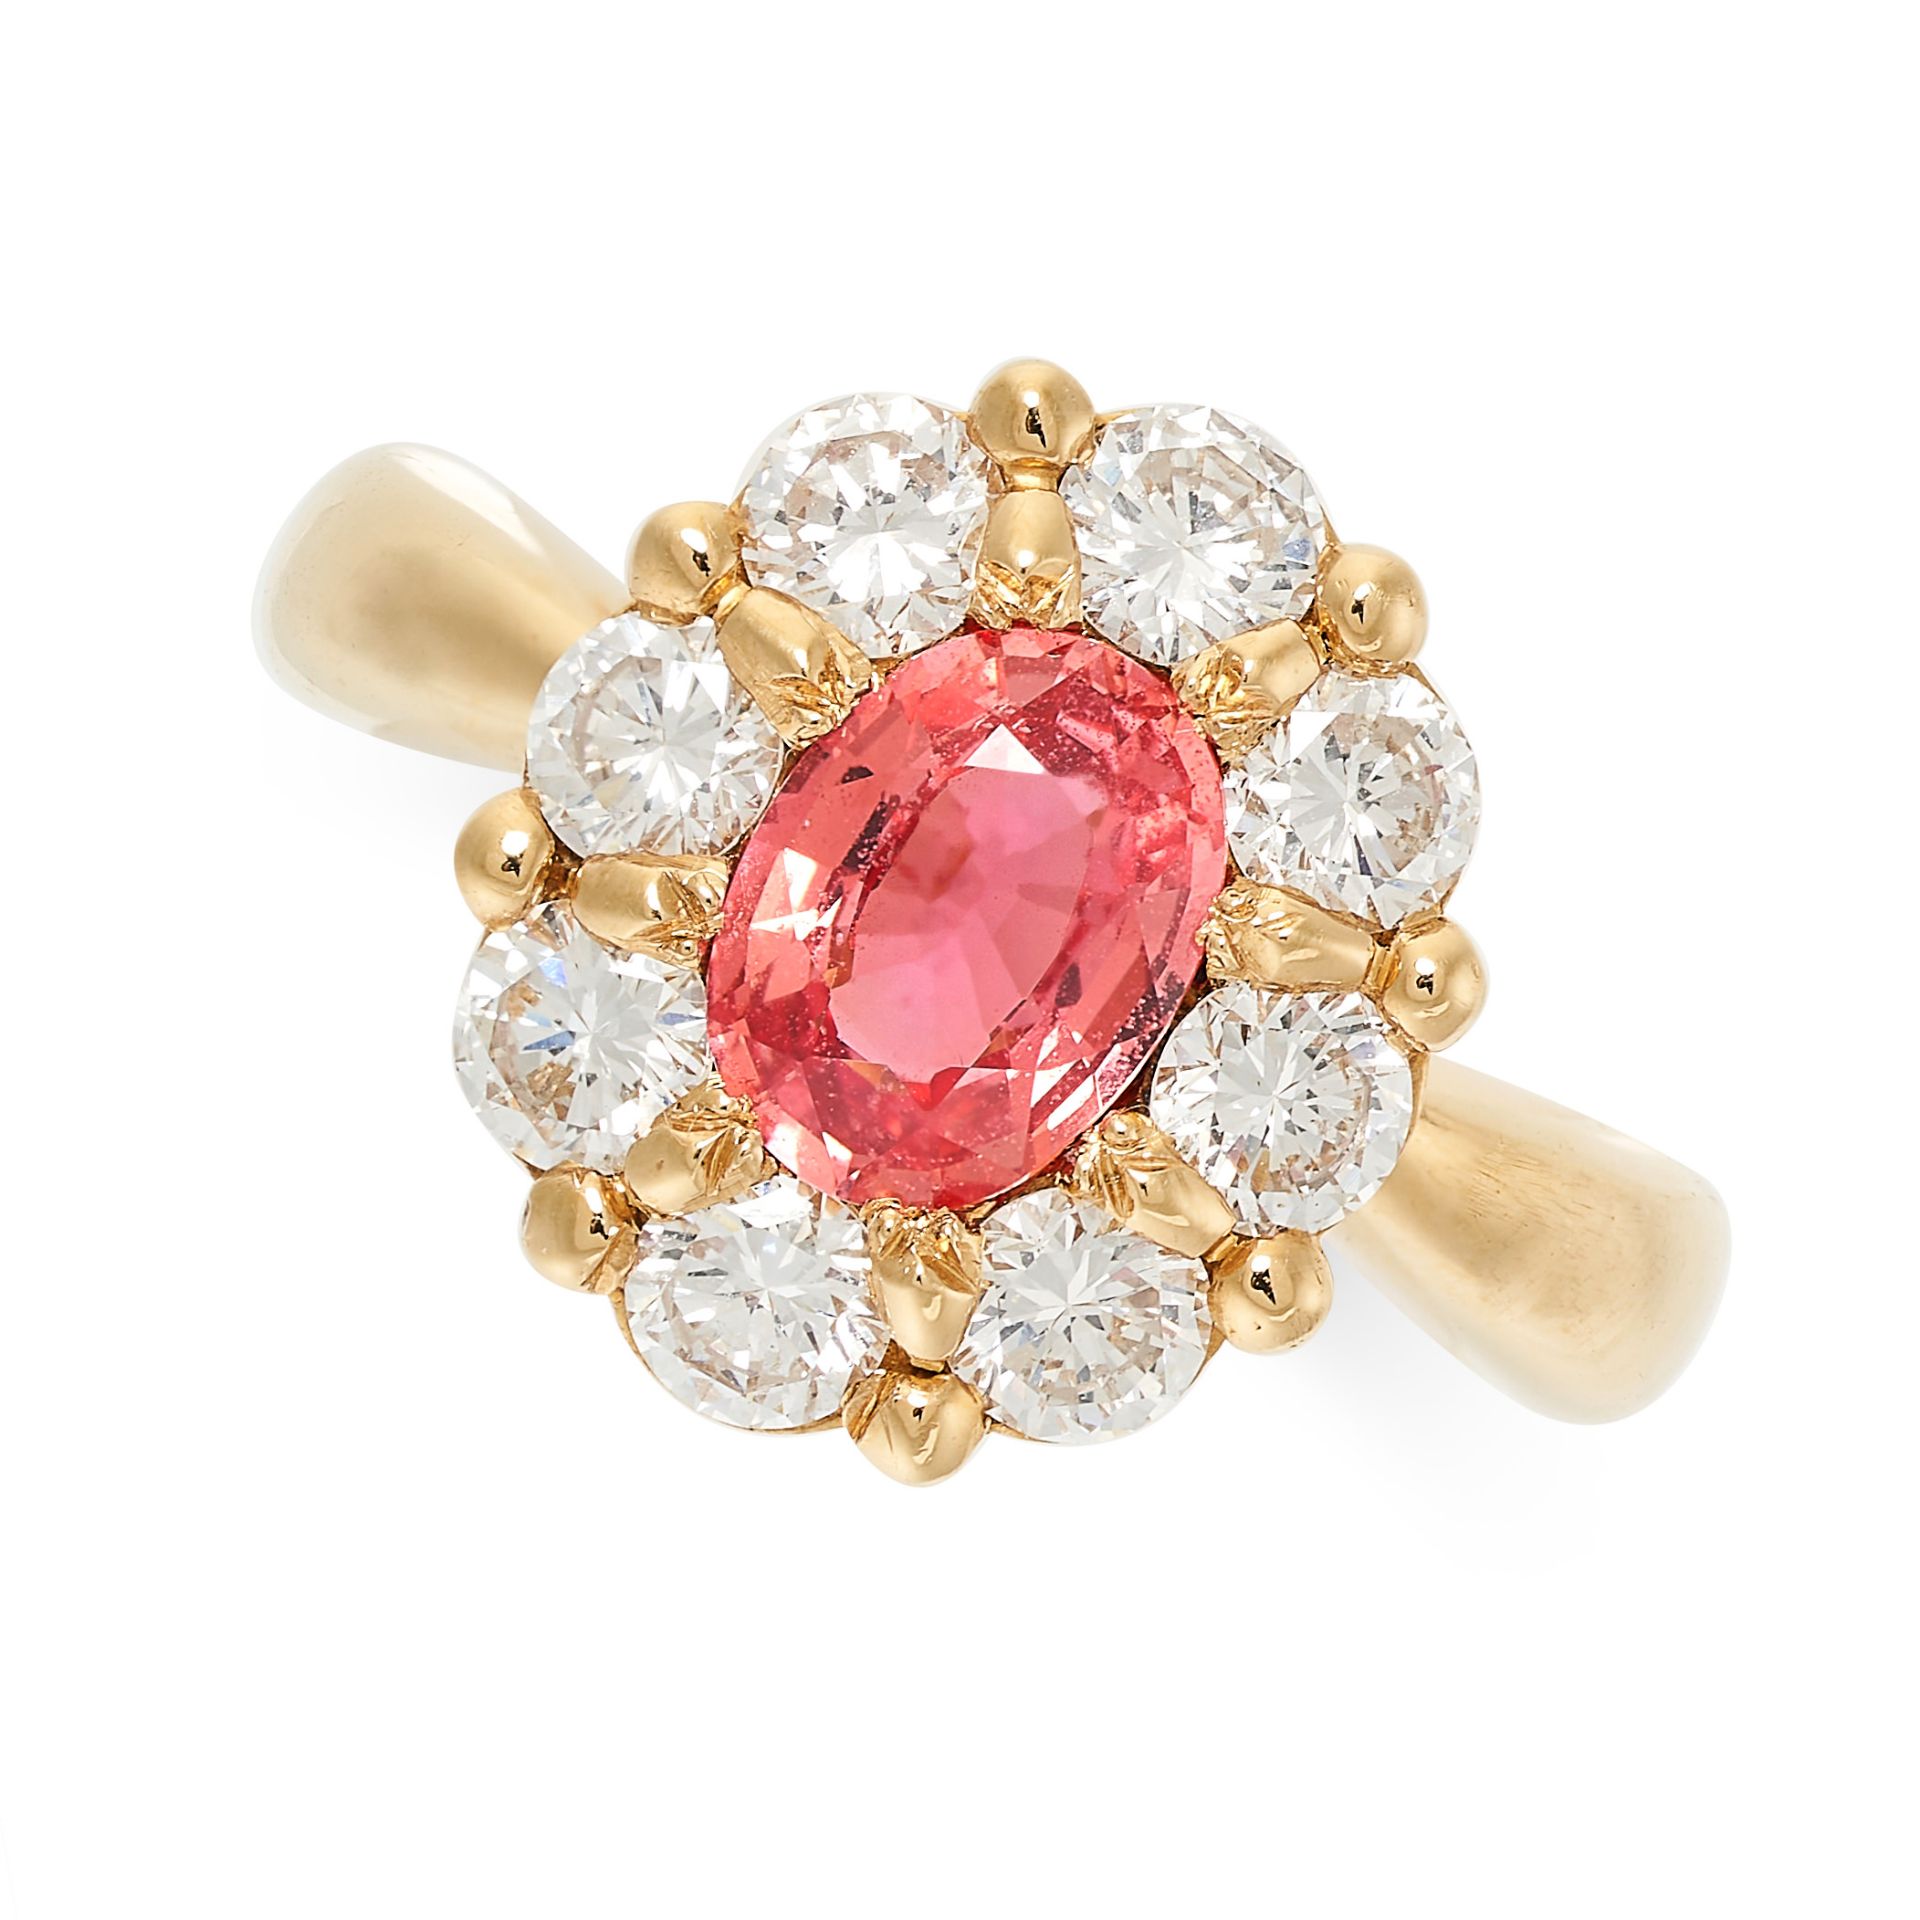 A SAPPHIRE AND DIAMOND DRESS RING in 18ct yellow gold, set with an oval cut orangey-pink sapphire of